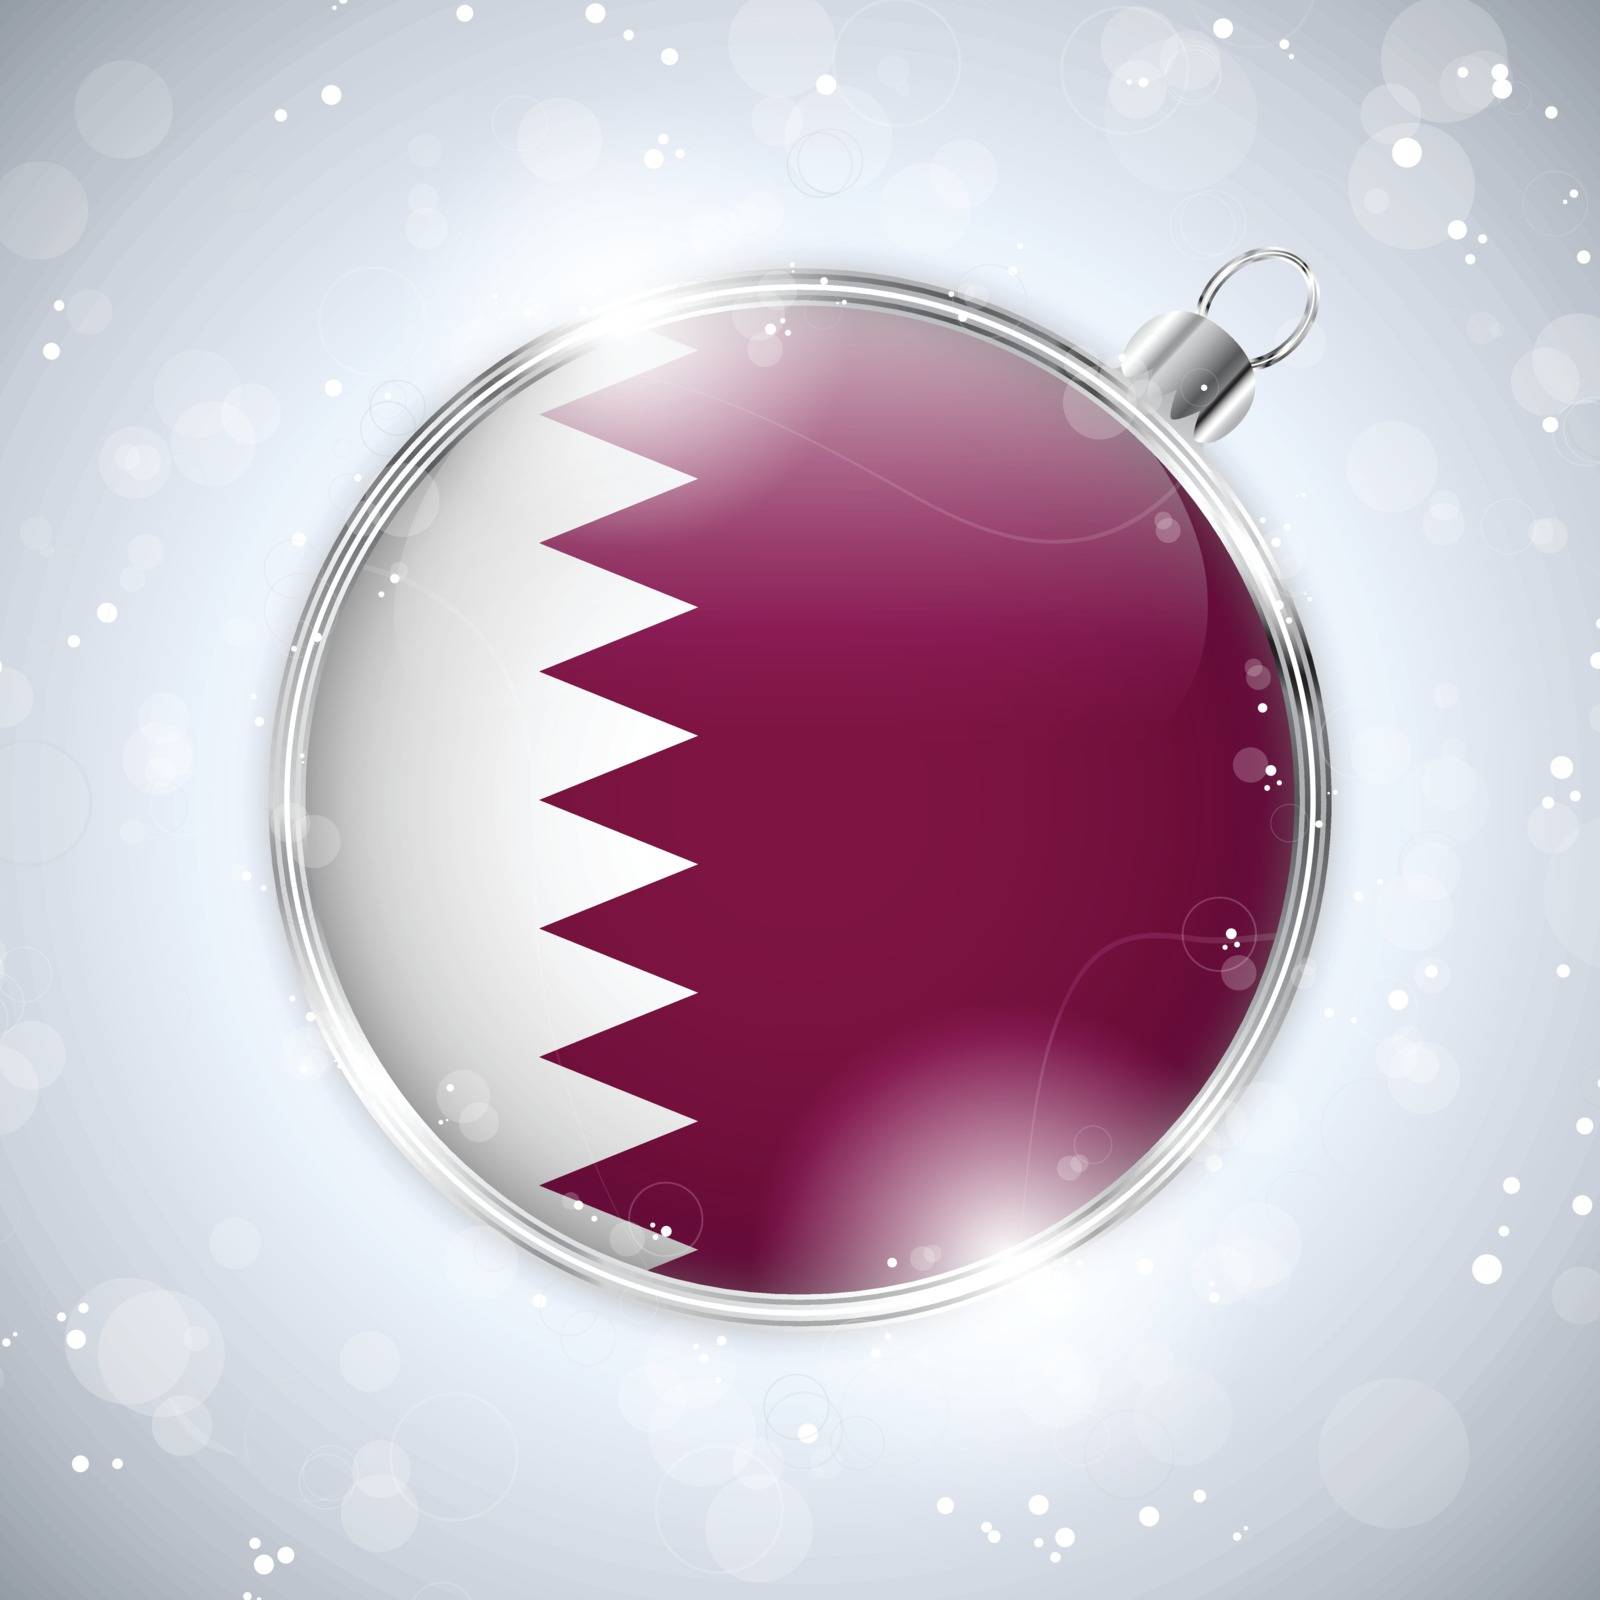 Merry Christmas Silver Ball with Flag Qatar by gubh83